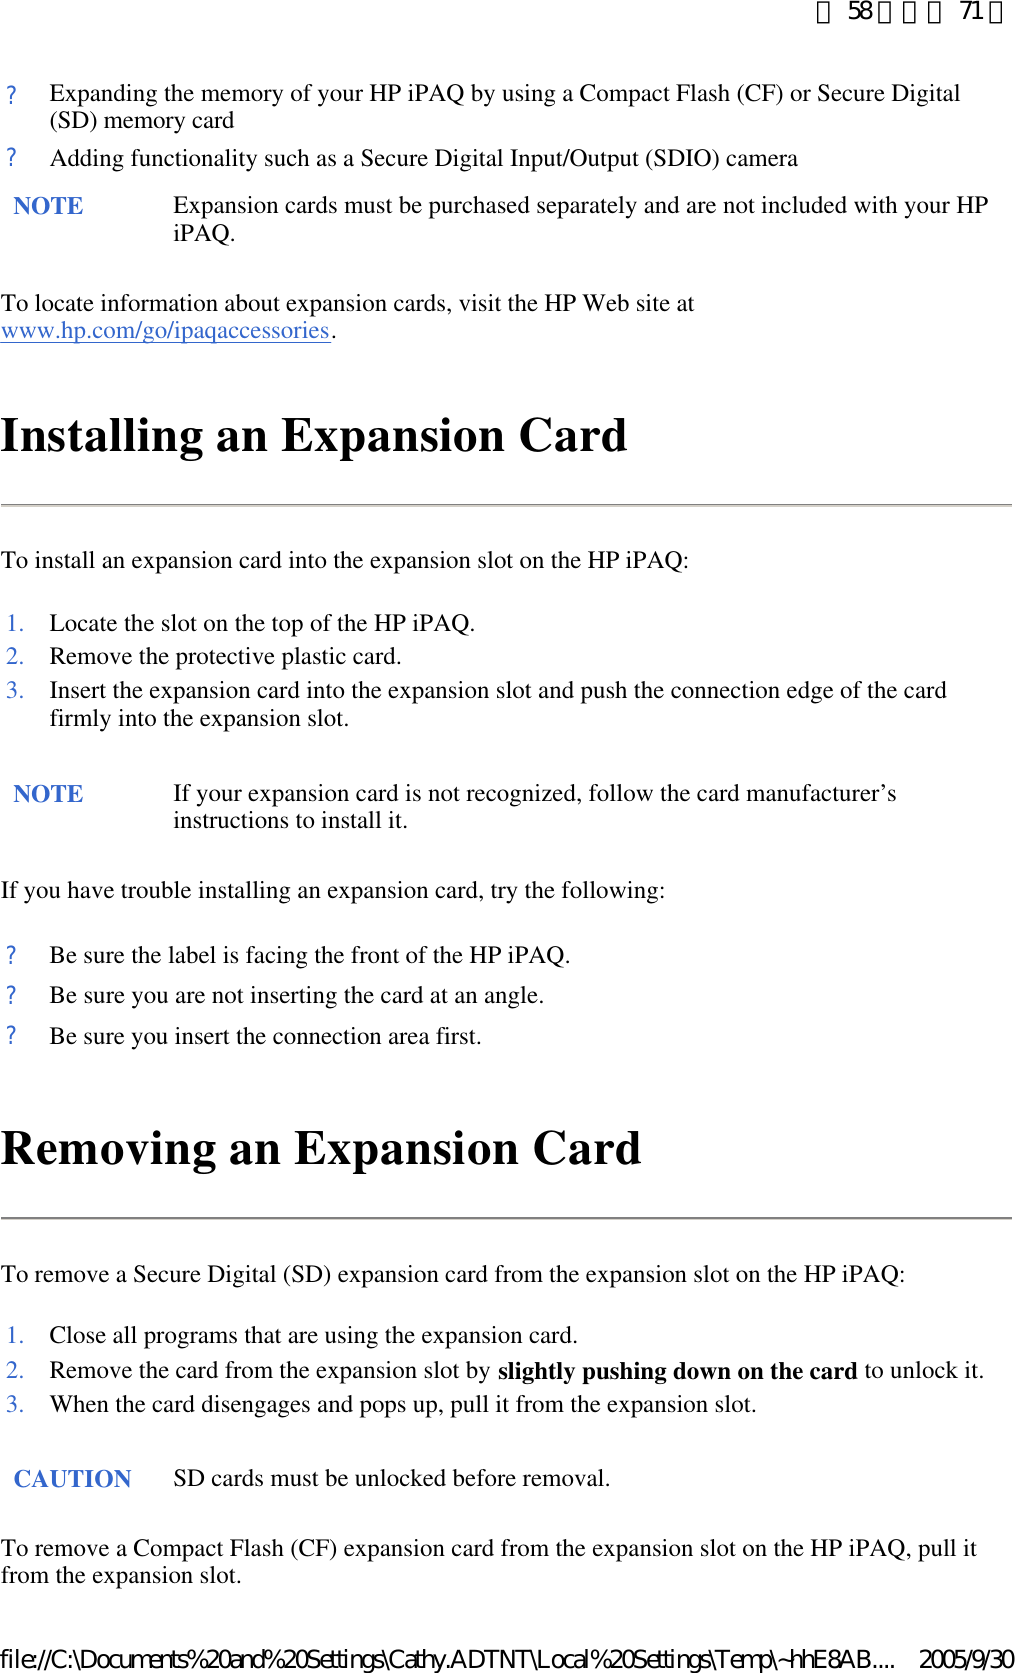 To locate information about expansion cards, visit the HP Web site at www.hp.com/go/ipaqaccessories.  Installing an Expansion Card To install an expansion card into the expansion slot on the HP iPAQ: If you have trouble installing an expansion card, try the following: Removing an Expansion Card To remove a Secure Digital (SD) expansion card from the expansion slot on the HP iPAQ: To remove a Compact Flash (CF) expansion card from the expansion slot on the HP iPAQ, pull it from the expansion slot. ?Expanding the memory of your HP iPAQ by using a Compact Flash (CF) or Secure Digital (SD) memory card?Adding functionality such as a Secure Digital Input/Output (SDIO) cameraNOTE Expansion cards must be purchased separately and are not included with your HP iPAQ. 1. Locate the slot on the top of the HP iPAQ.2. Remove the protective plastic card.3. Insert the expansion card into the expansion slot and push the connection edge of the card firmly into the expansion slot. NOTE If your expansion card is not recognized, follow the card manufacturer’s instructions to install it.  ?Be sure the label is facing the front of the HP iPAQ.?Be sure you are not inserting the card at an angle.?Be sure you insert the connection area first.1. Close all programs that are using the expansion card.2. Remove the card from the expansion slot by slightly pushing down on the card to unlock it. 3. When the card disengages and pops up, pull it from the expansion slot. CAUTION SD cards must be unlocked before removal. 第 58 頁，共 71 頁2005/9/30file://C:\Documents%20and%20Settings\Cathy.ADTNT\Local%20Settings\Temp\~hhE8AB....